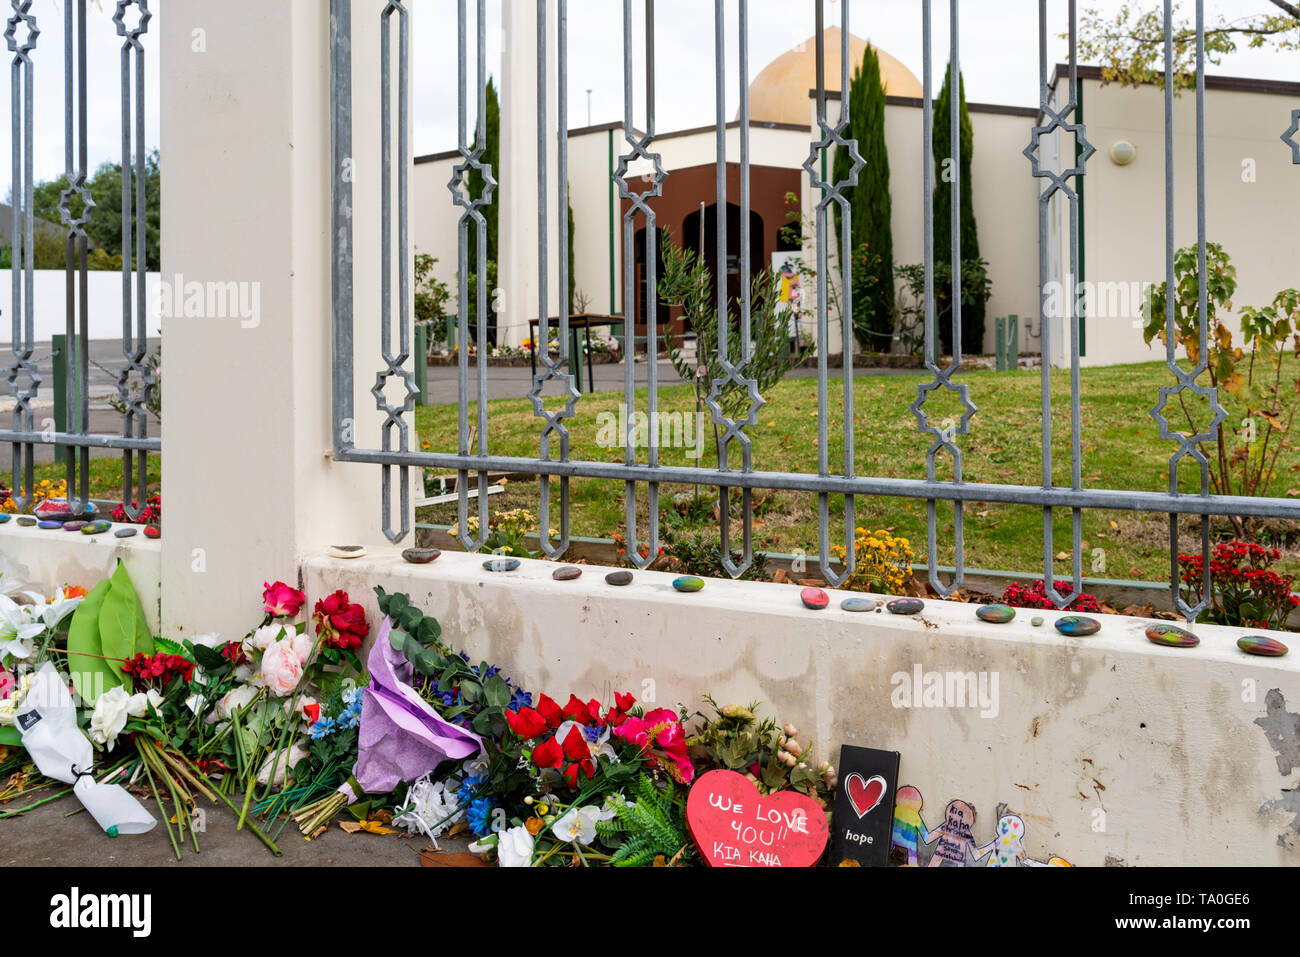 Christchurch, New Zealand, Mosque, Masjid Al Noor, with memorial tributes and police presence Stock Photo